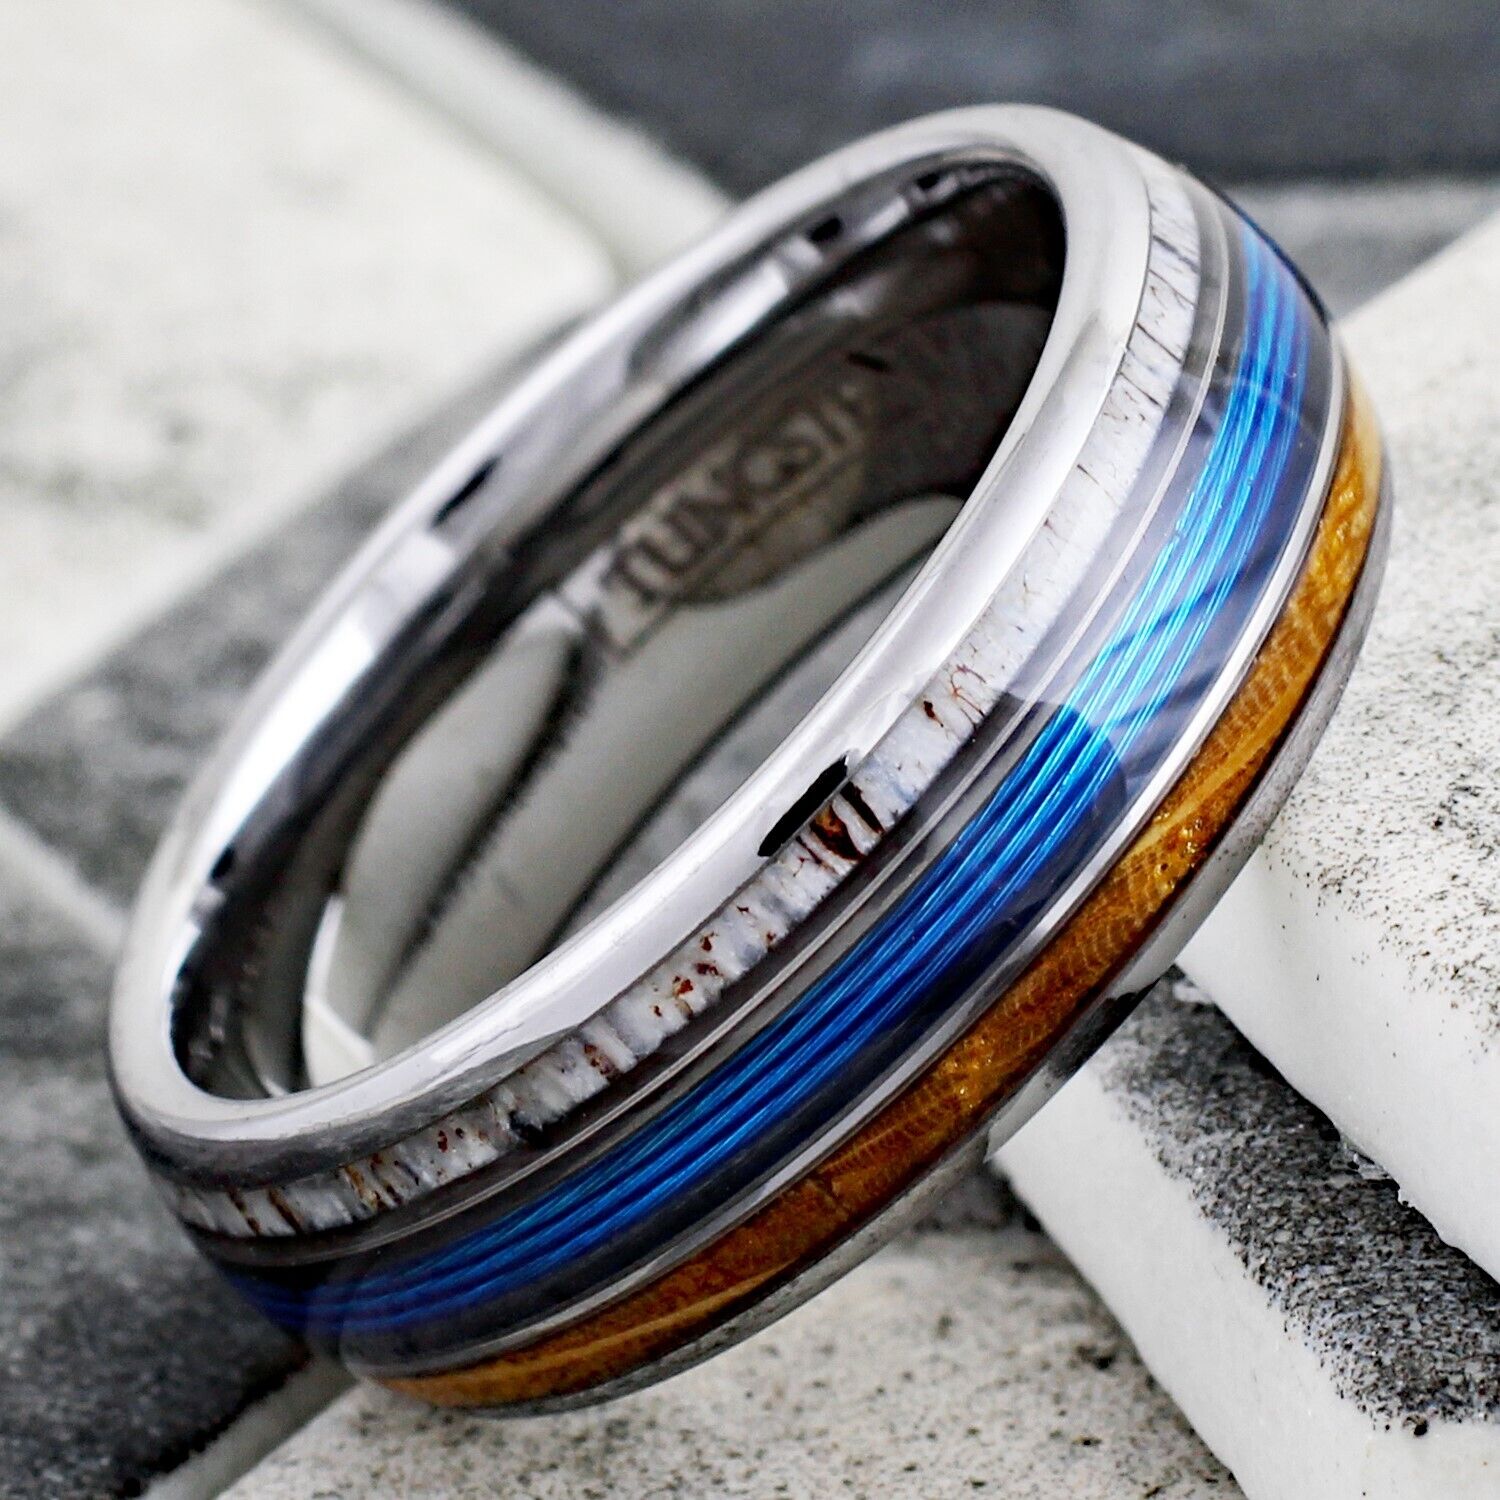 Polished Silver Low Dome Tungsten Band Ring w/ Blue Fishing Line Inlay -  925Express